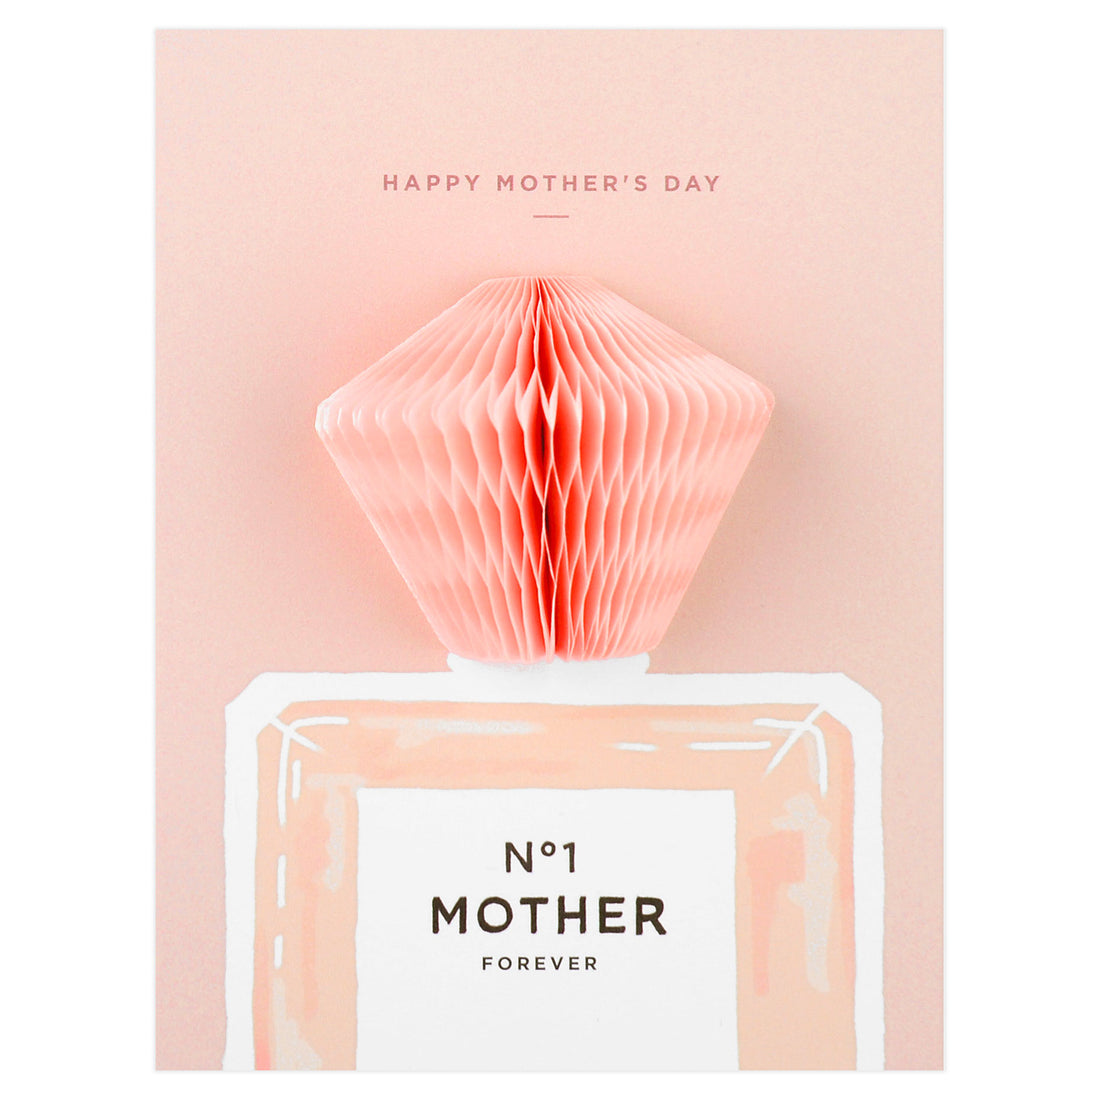 Inklings Paperie No. 1 Mother Pop-Up Perfume Mother's Day Card 